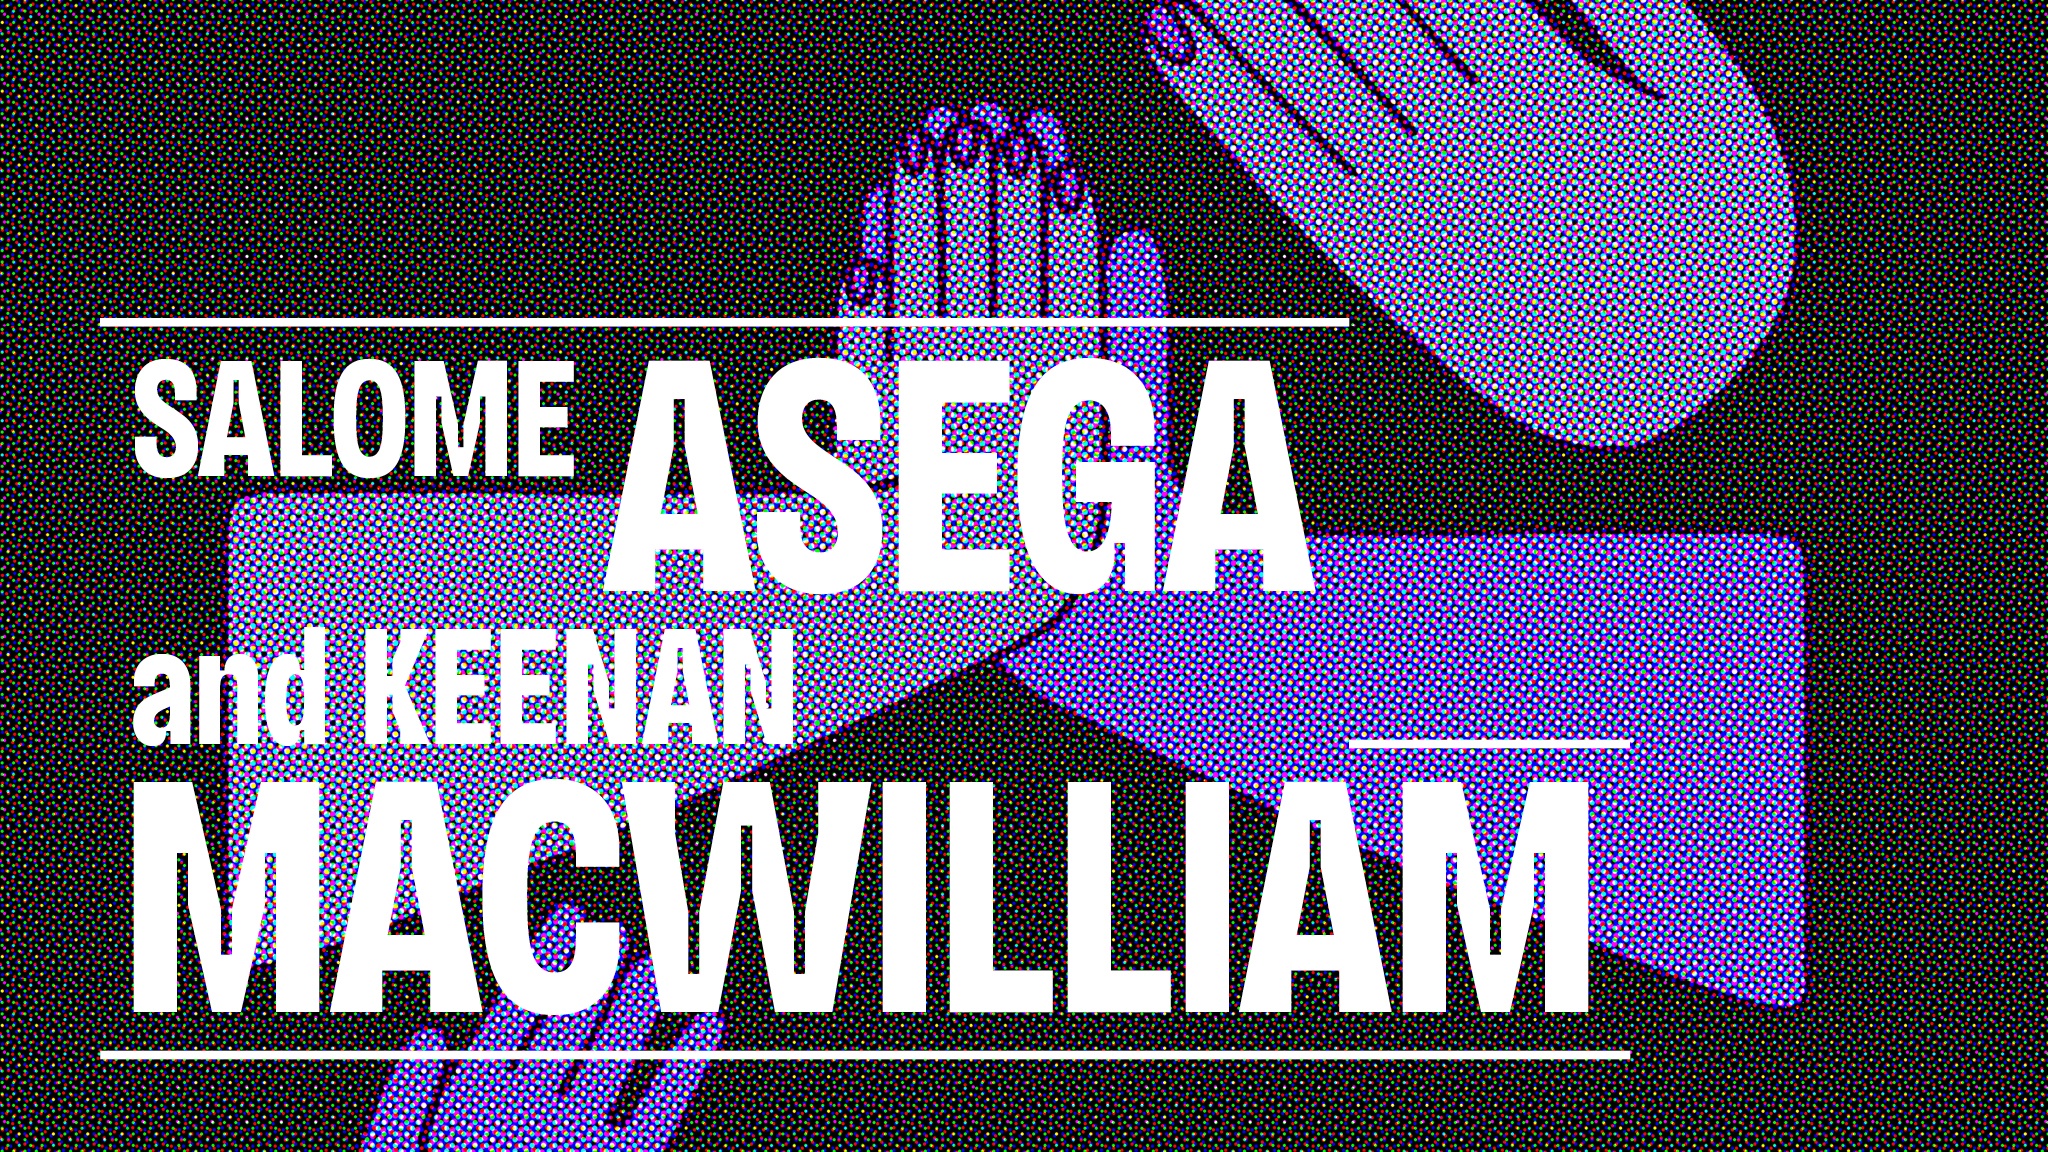 Purple cartoon hands clapping with the names Salome Asega and Keenan MacWilliam superimposed in white type